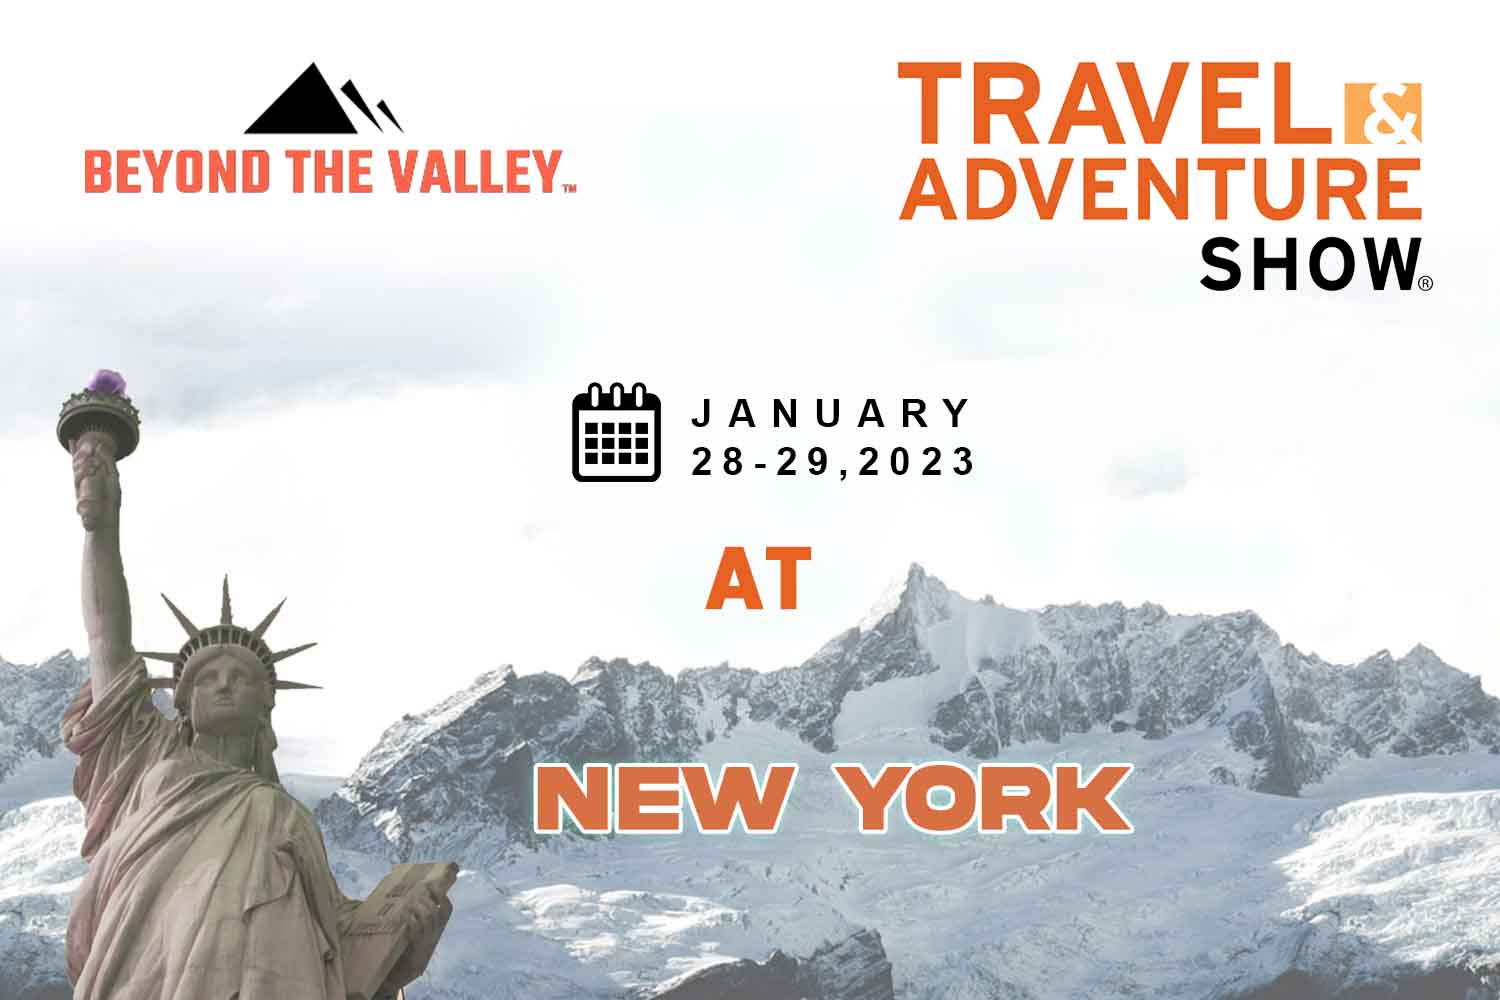 new york travel and adventure show 2023